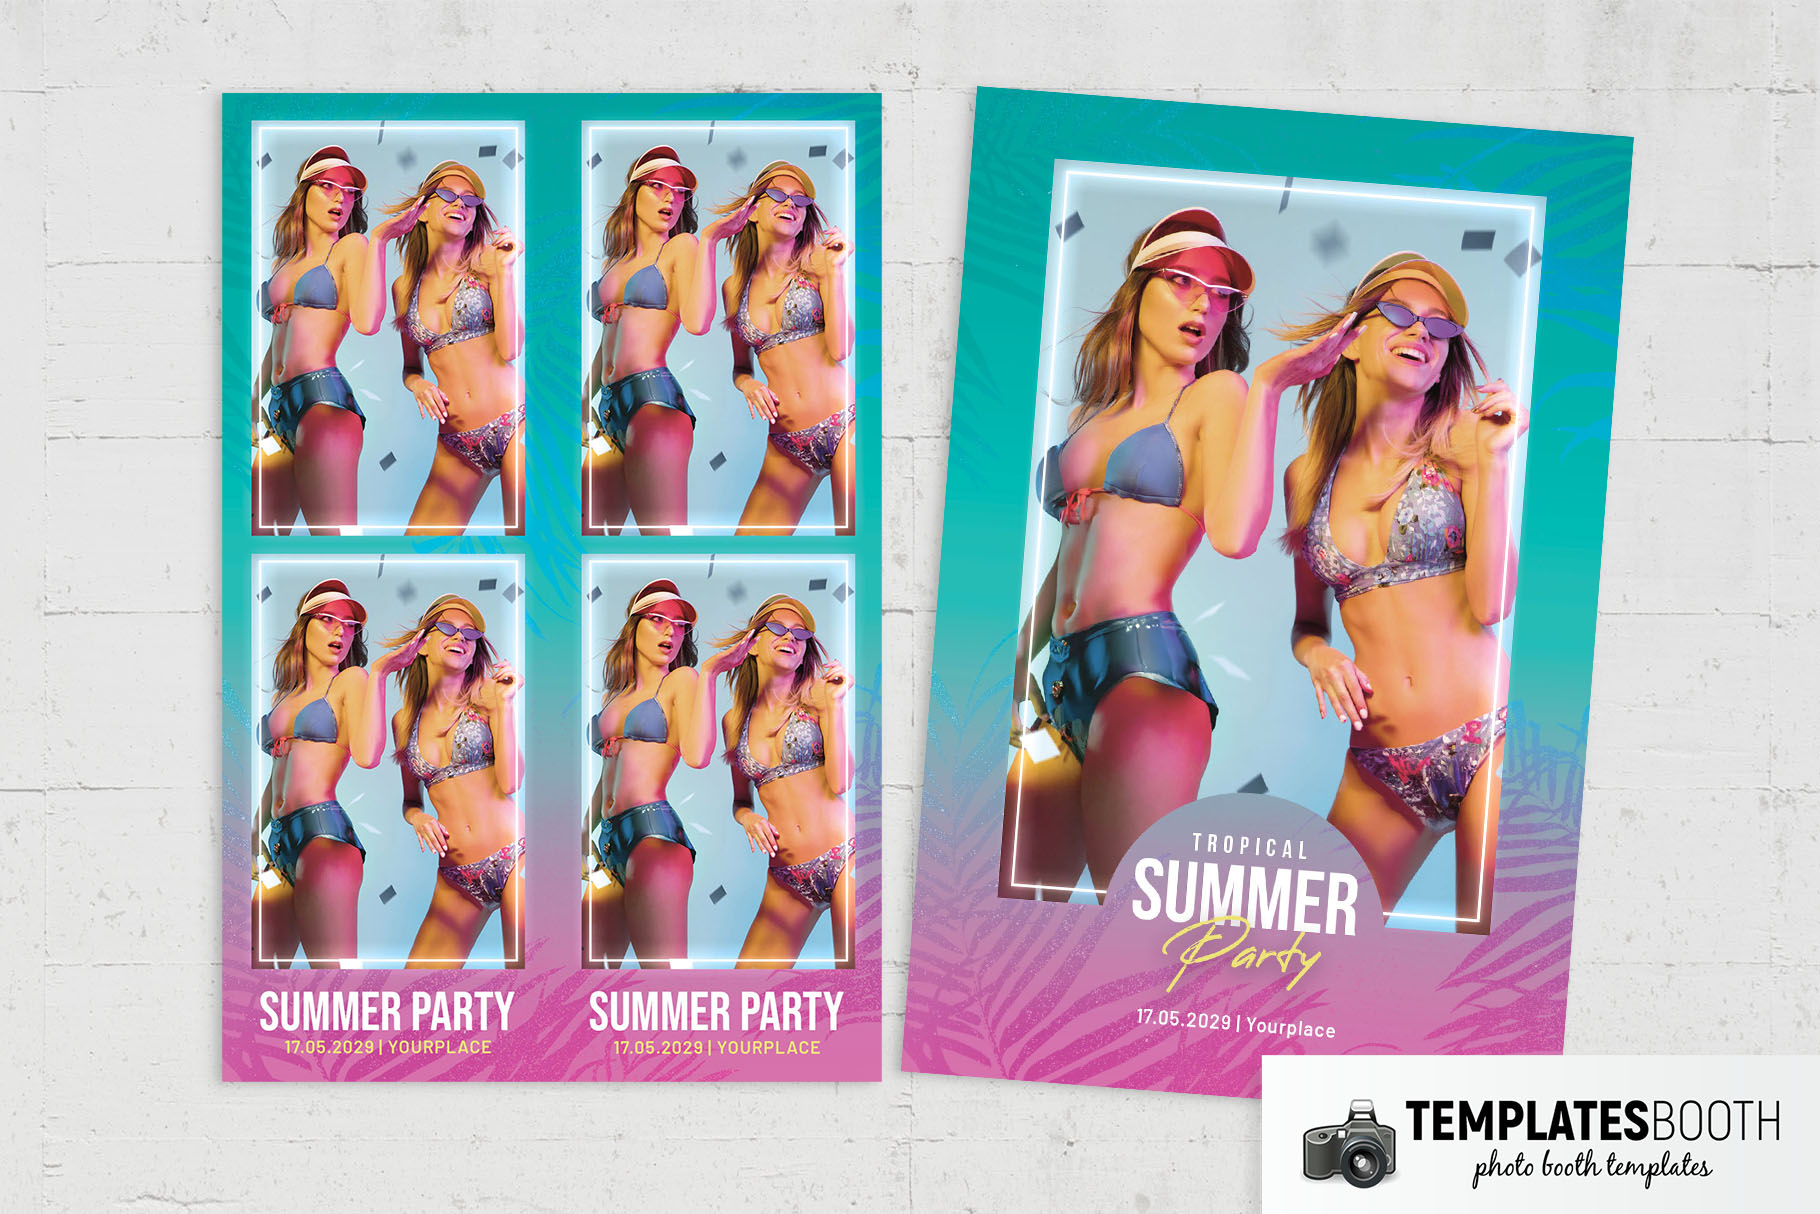 Tropical Summer Party Photo Booth Template